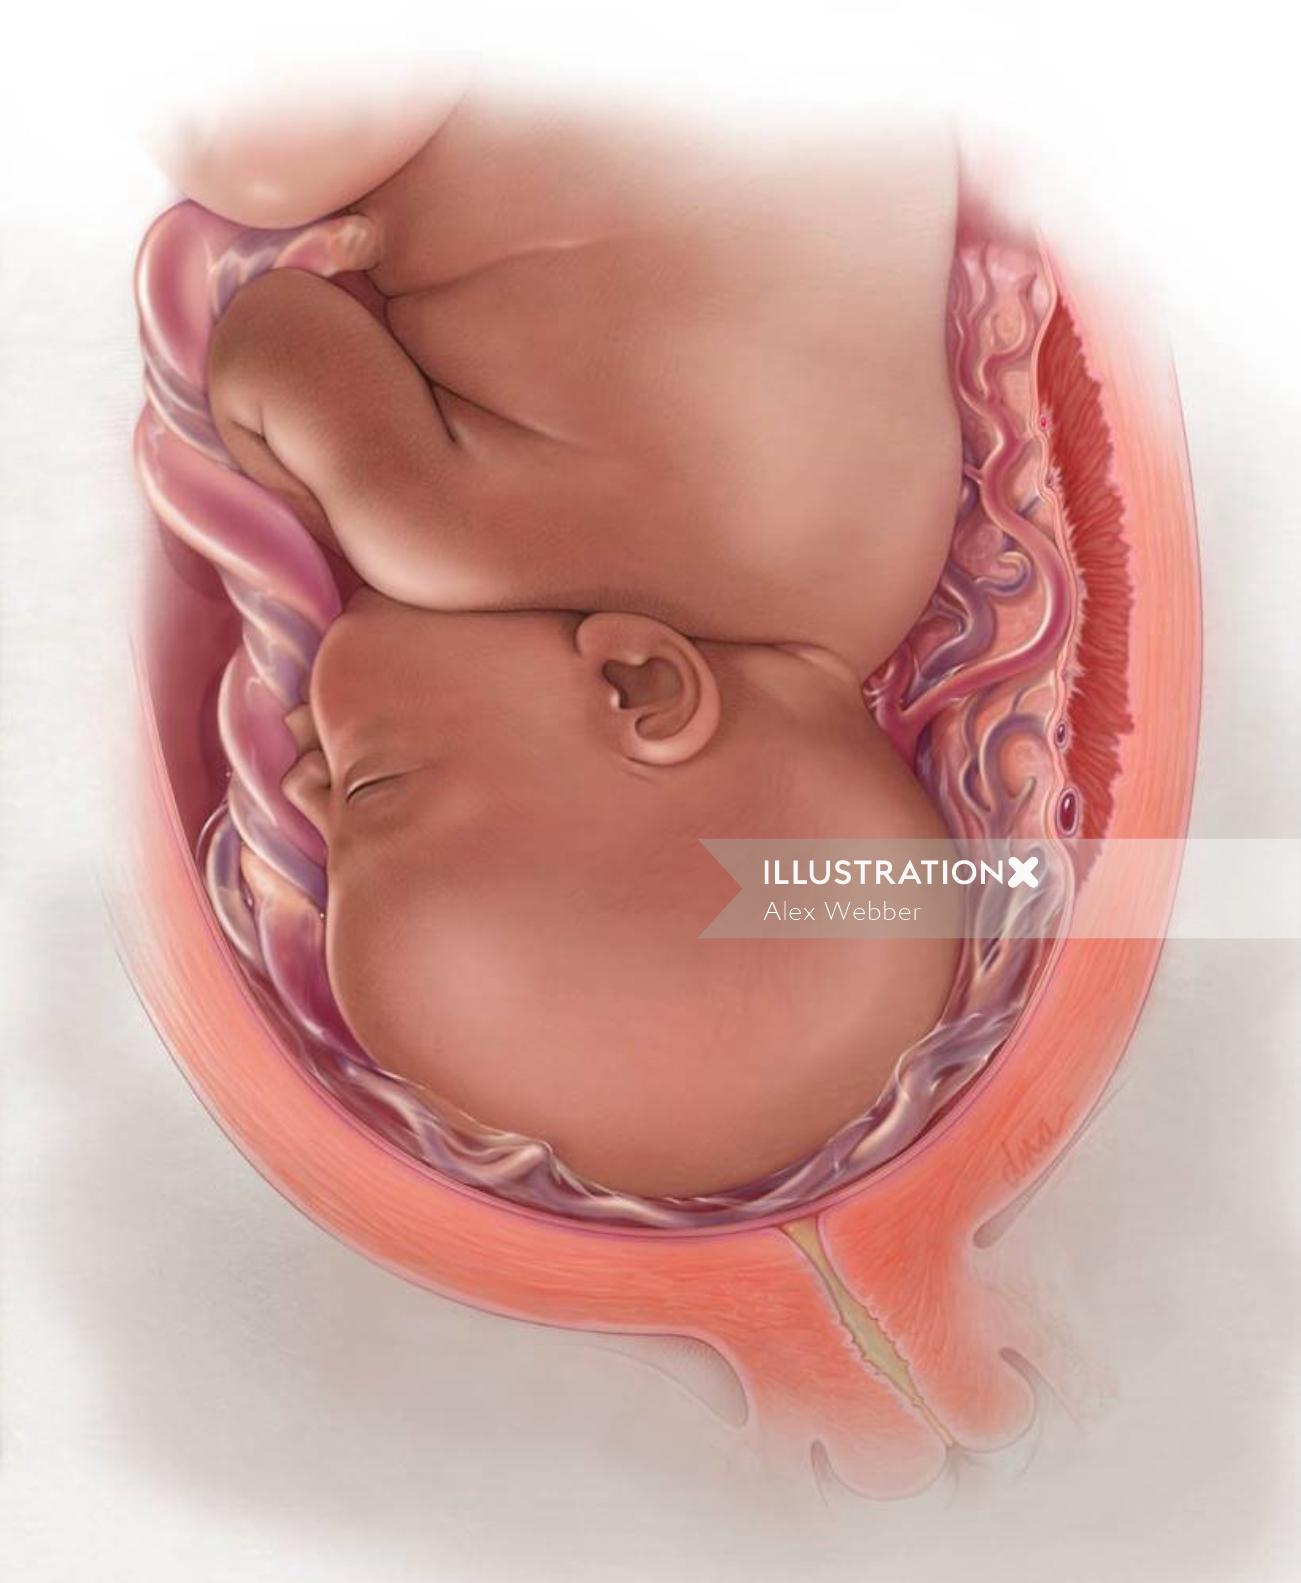 An illustration of baby in womb